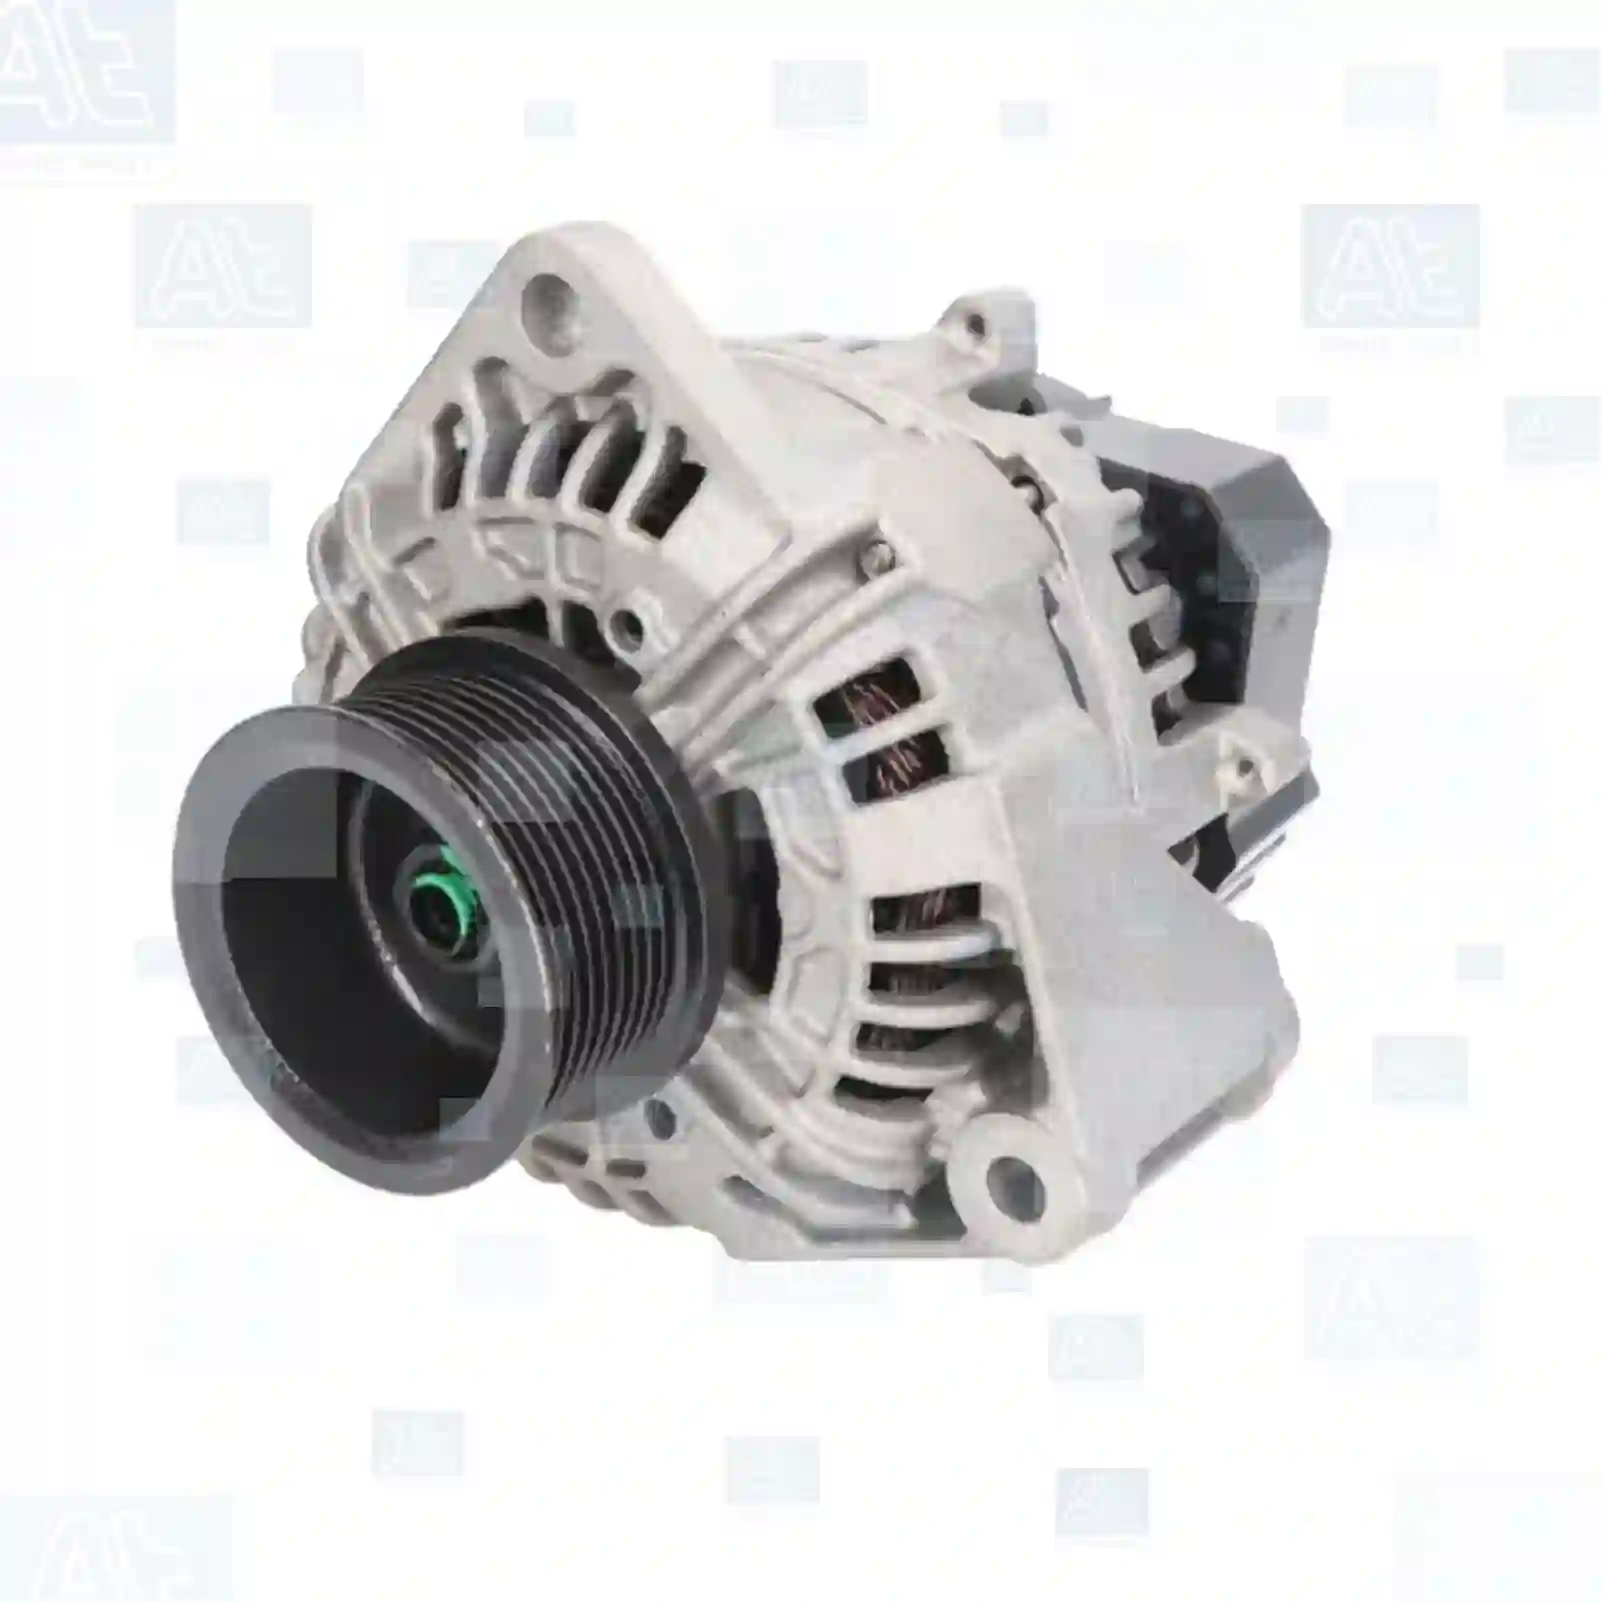 Alternator, at no 77710016, oem no: 0001504750, 0101543902, 0111548202, 0121541102, 012154110226, 012154110280, 012154110285, 0121544002, 0121544202, 0121544302, 012154430280, 0121544402, 0121546702, 012154670280, 013154290280, 0131547902, 013154790280, 0131548702, 0141544902, 0141545002, 0141545402, 0141549502, 1544202, SE34R0121, 0131547902, 0141545402, ZG20240-0008 At Spare Part | Engine, Accelerator Pedal, Camshaft, Connecting Rod, Crankcase, Crankshaft, Cylinder Head, Engine Suspension Mountings, Exhaust Manifold, Exhaust Gas Recirculation, Filter Kits, Flywheel Housing, General Overhaul Kits, Engine, Intake Manifold, Oil Cleaner, Oil Cooler, Oil Filter, Oil Pump, Oil Sump, Piston & Liner, Sensor & Switch, Timing Case, Turbocharger, Cooling System, Belt Tensioner, Coolant Filter, Coolant Pipe, Corrosion Prevention Agent, Drive, Expansion Tank, Fan, Intercooler, Monitors & Gauges, Radiator, Thermostat, V-Belt / Timing belt, Water Pump, Fuel System, Electronical Injector Unit, Feed Pump, Fuel Filter, cpl., Fuel Gauge Sender,  Fuel Line, Fuel Pump, Fuel Tank, Injection Line Kit, Injection Pump, Exhaust System, Clutch & Pedal, Gearbox, Propeller Shaft, Axles, Brake System, Hubs & Wheels, Suspension, Leaf Spring, Universal Parts / Accessories, Steering, Electrical System, Cabin Alternator, at no 77710016, oem no: 0001504750, 0101543902, 0111548202, 0121541102, 012154110226, 012154110280, 012154110285, 0121544002, 0121544202, 0121544302, 012154430280, 0121544402, 0121546702, 012154670280, 013154290280, 0131547902, 013154790280, 0131548702, 0141544902, 0141545002, 0141545402, 0141549502, 1544202, SE34R0121, 0131547902, 0141545402, ZG20240-0008 At Spare Part | Engine, Accelerator Pedal, Camshaft, Connecting Rod, Crankcase, Crankshaft, Cylinder Head, Engine Suspension Mountings, Exhaust Manifold, Exhaust Gas Recirculation, Filter Kits, Flywheel Housing, General Overhaul Kits, Engine, Intake Manifold, Oil Cleaner, Oil Cooler, Oil Filter, Oil Pump, Oil Sump, Piston & Liner, Sensor & Switch, Timing Case, Turbocharger, Cooling System, Belt Tensioner, Coolant Filter, Coolant Pipe, Corrosion Prevention Agent, Drive, Expansion Tank, Fan, Intercooler, Monitors & Gauges, Radiator, Thermostat, V-Belt / Timing belt, Water Pump, Fuel System, Electronical Injector Unit, Feed Pump, Fuel Filter, cpl., Fuel Gauge Sender,  Fuel Line, Fuel Pump, Fuel Tank, Injection Line Kit, Injection Pump, Exhaust System, Clutch & Pedal, Gearbox, Propeller Shaft, Axles, Brake System, Hubs & Wheels, Suspension, Leaf Spring, Universal Parts / Accessories, Steering, Electrical System, Cabin